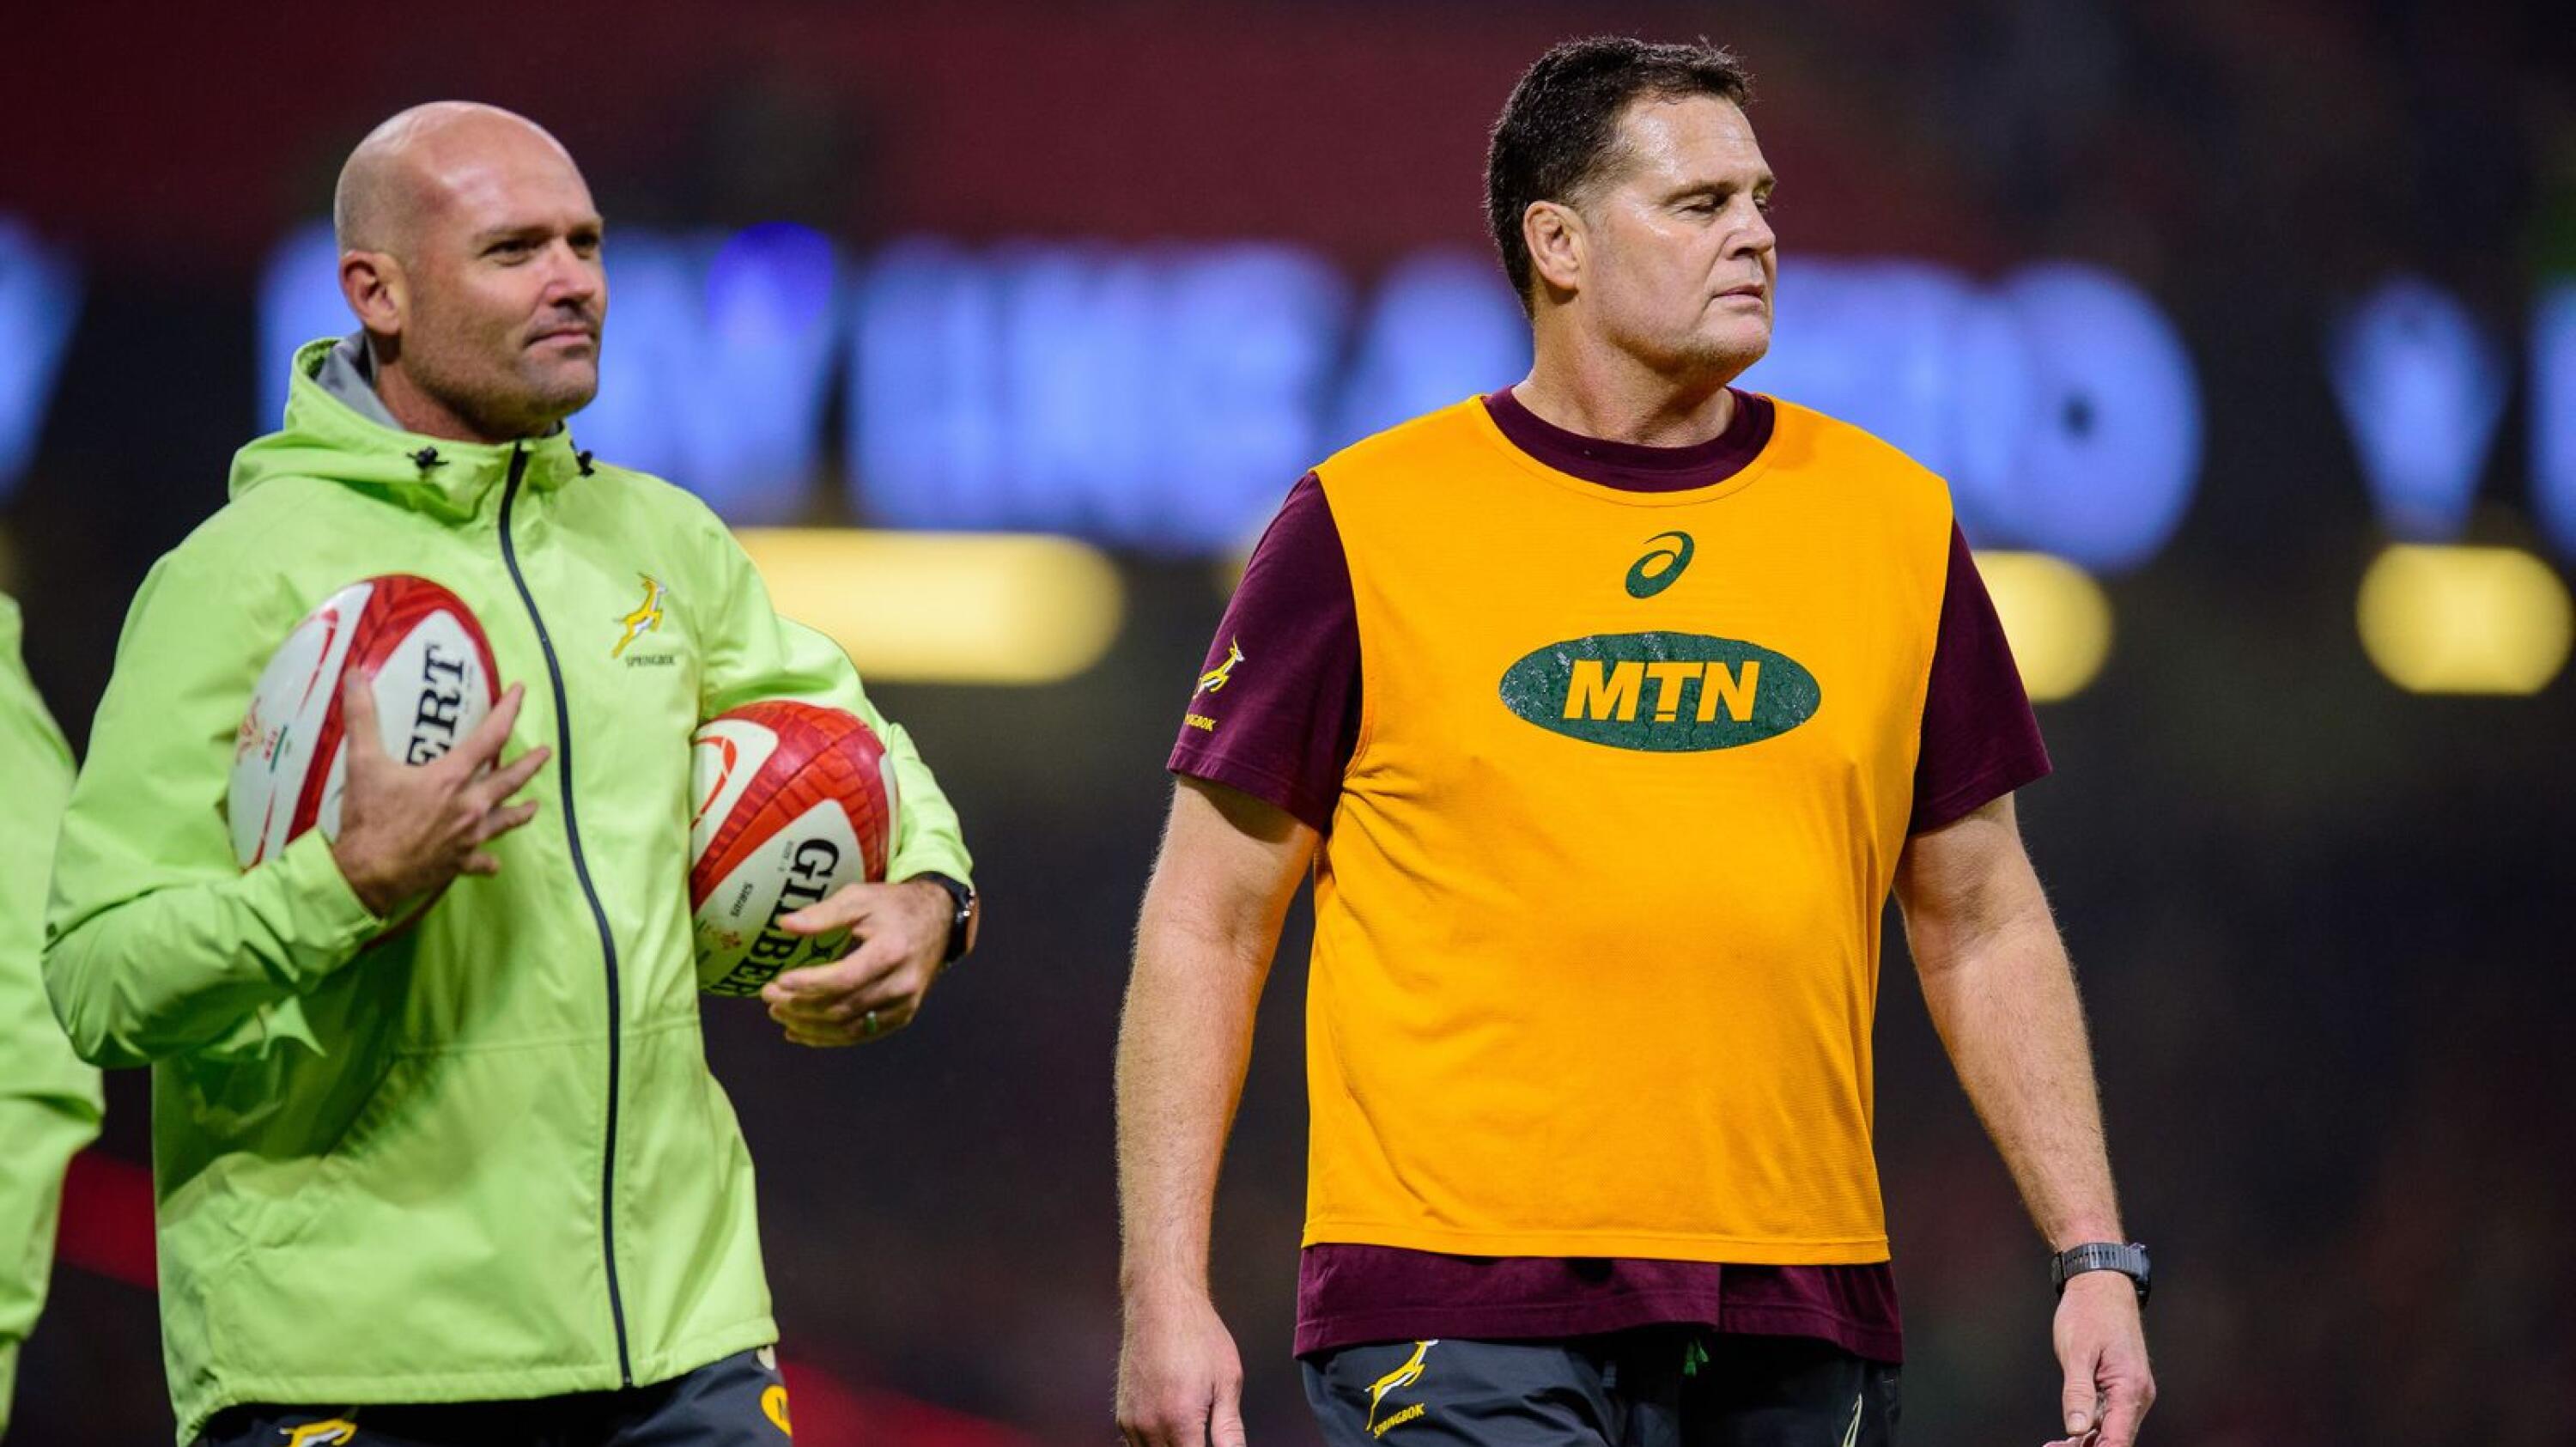 Springbok head coach Jacques Nienaber will be able to move out of Rassie Erasmus’ shadow by moving to Leinster